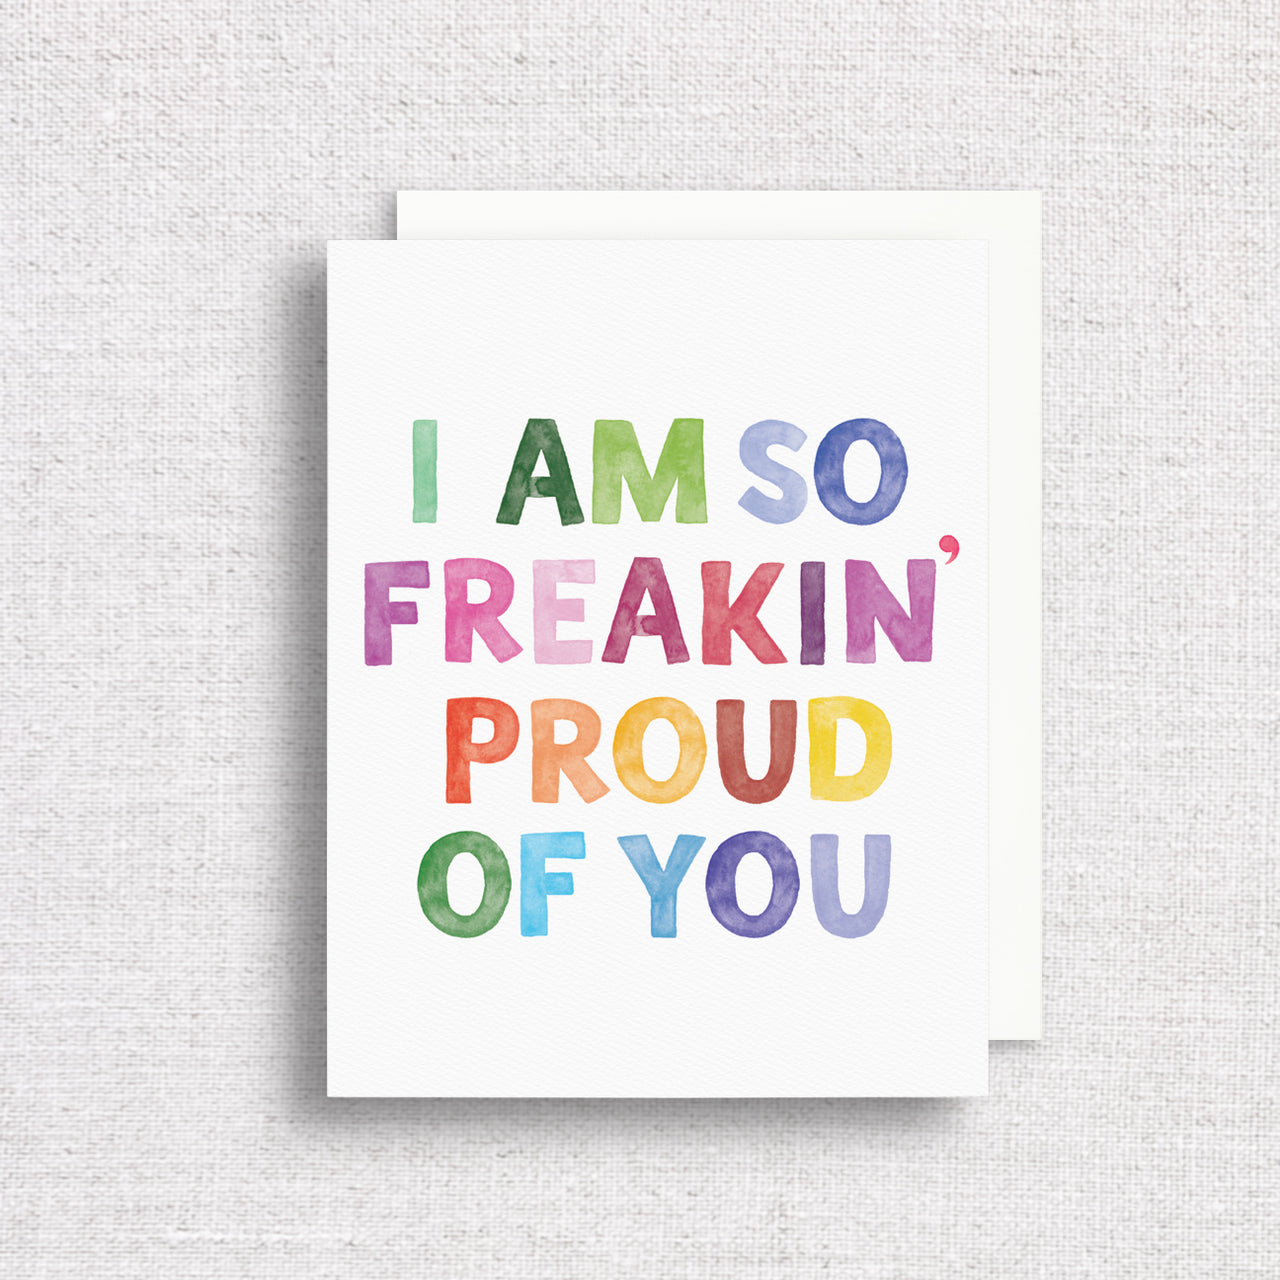 I'm So Freakin' Proud of You Greeting Card by Gert & Co